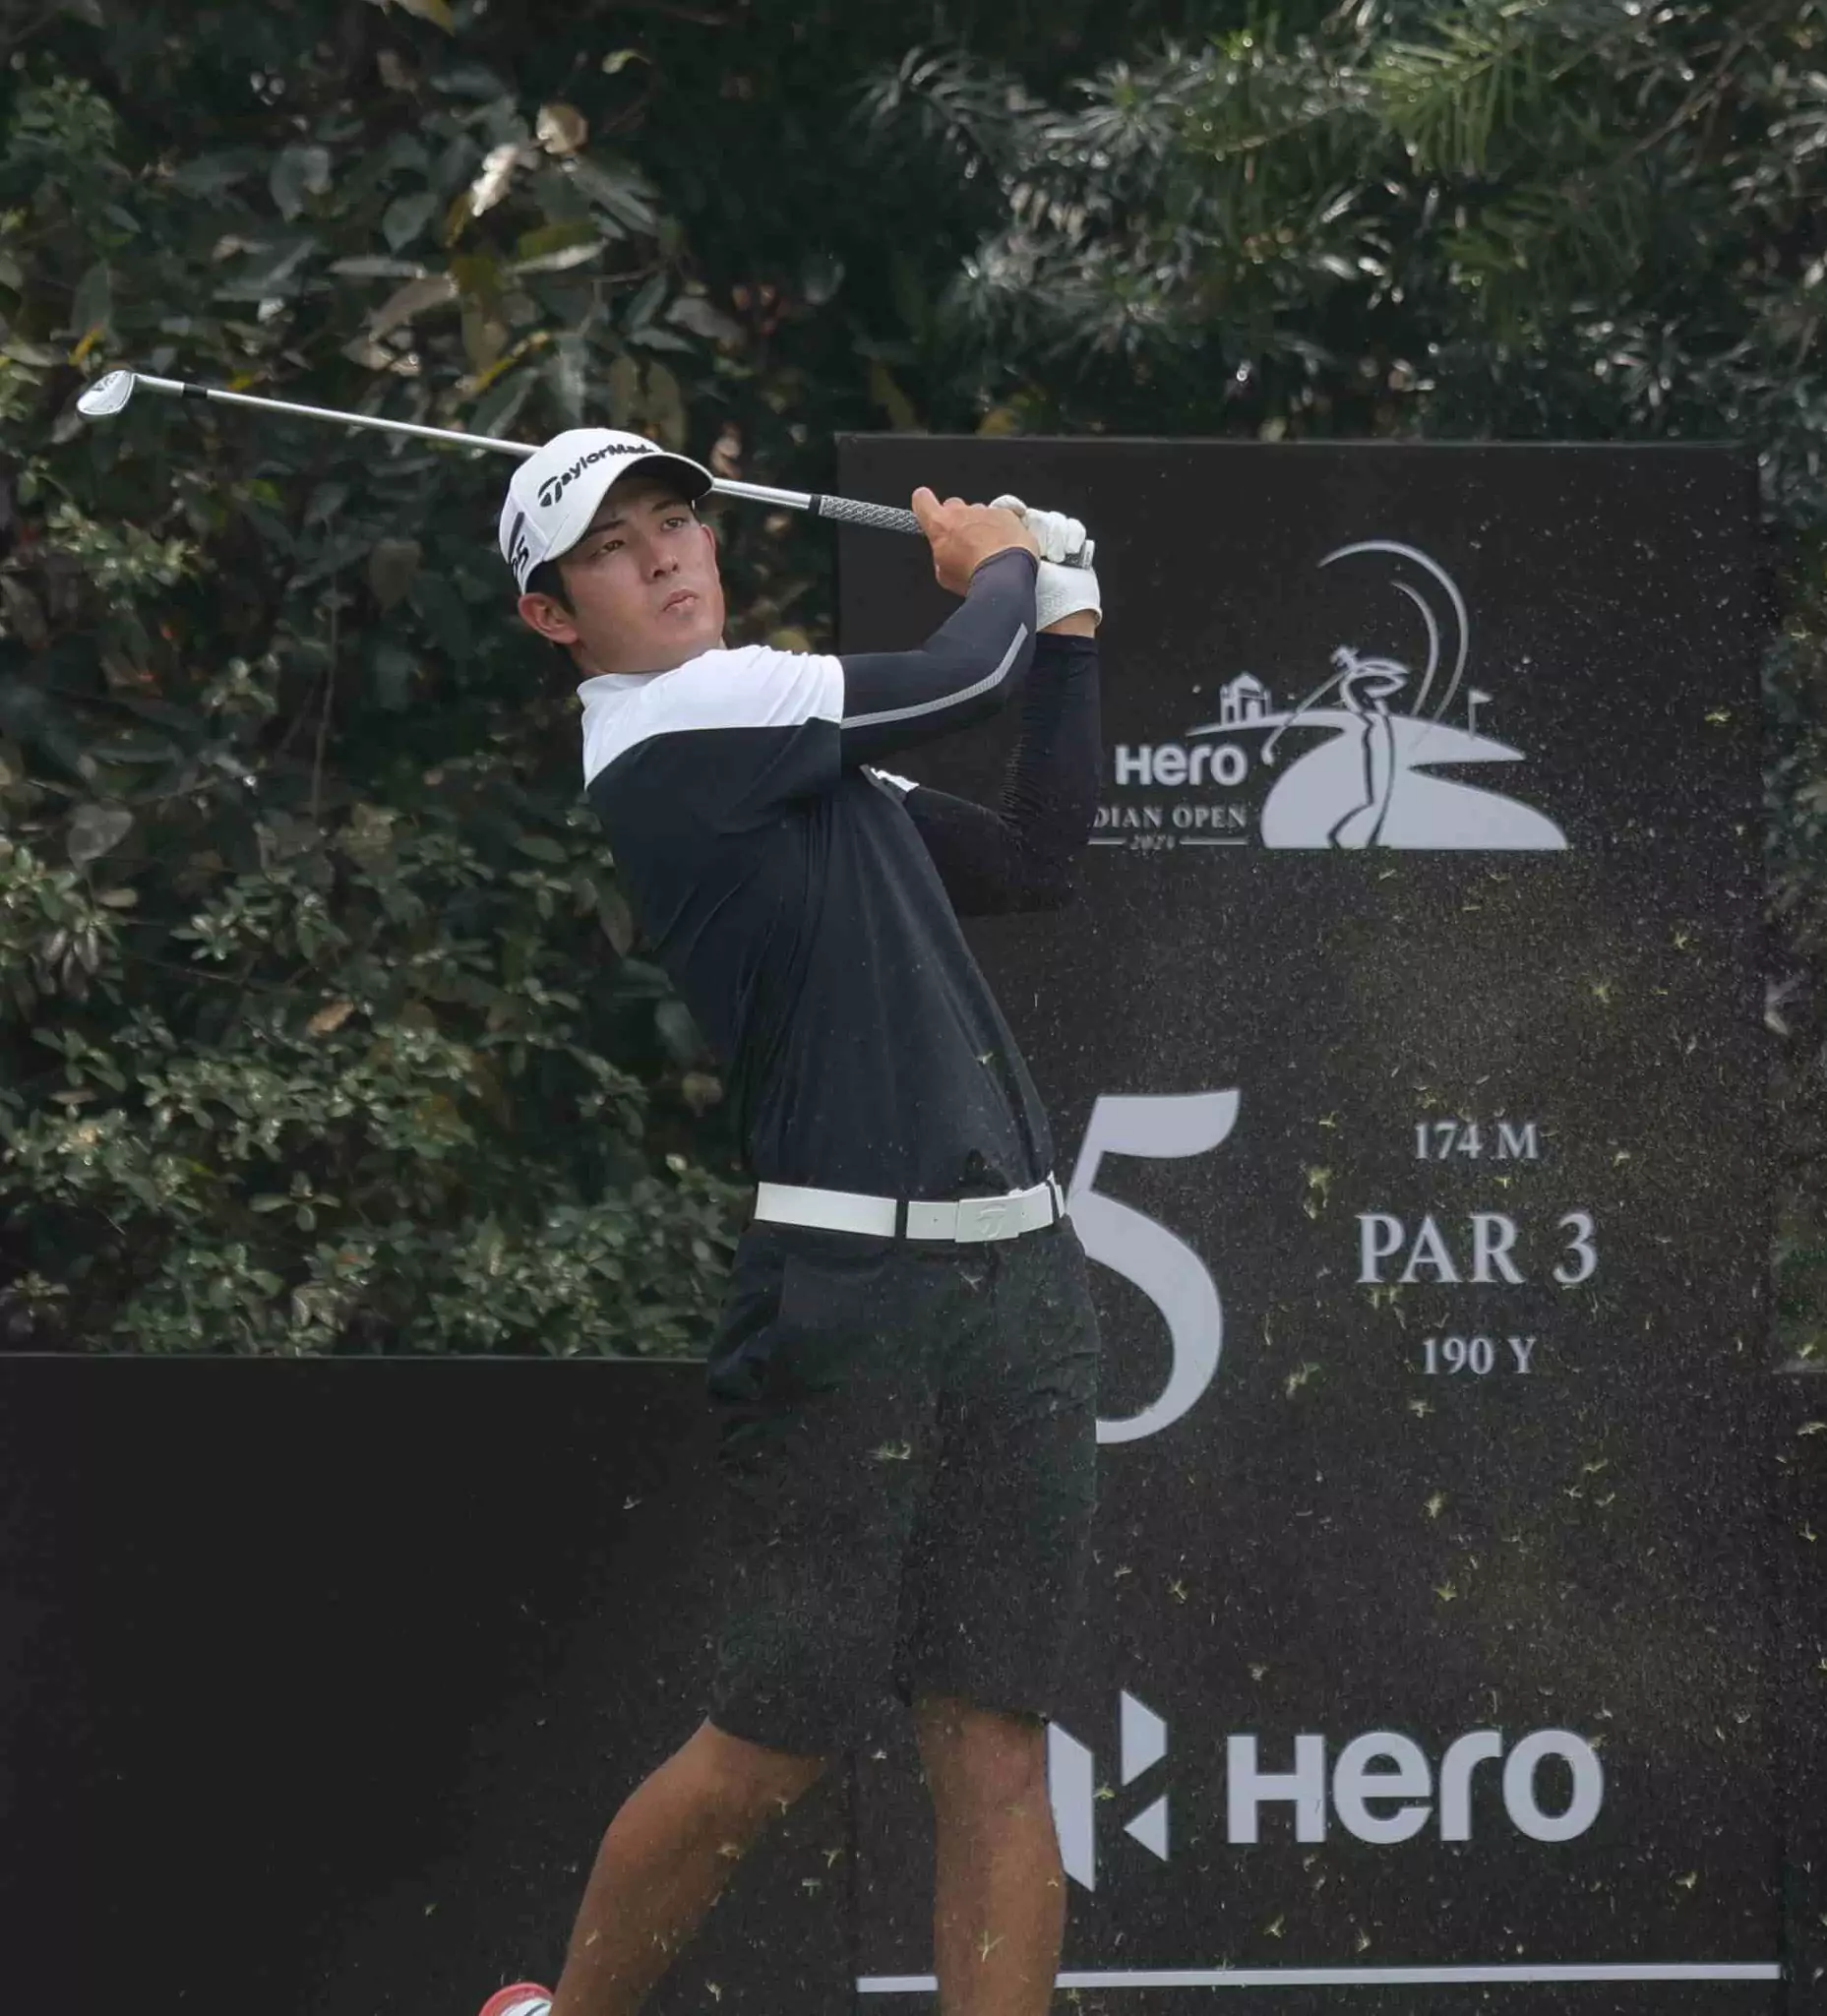 Nakajima rules the course to build 4-shot lead; Veer stays best Indian at Hero Indian Open